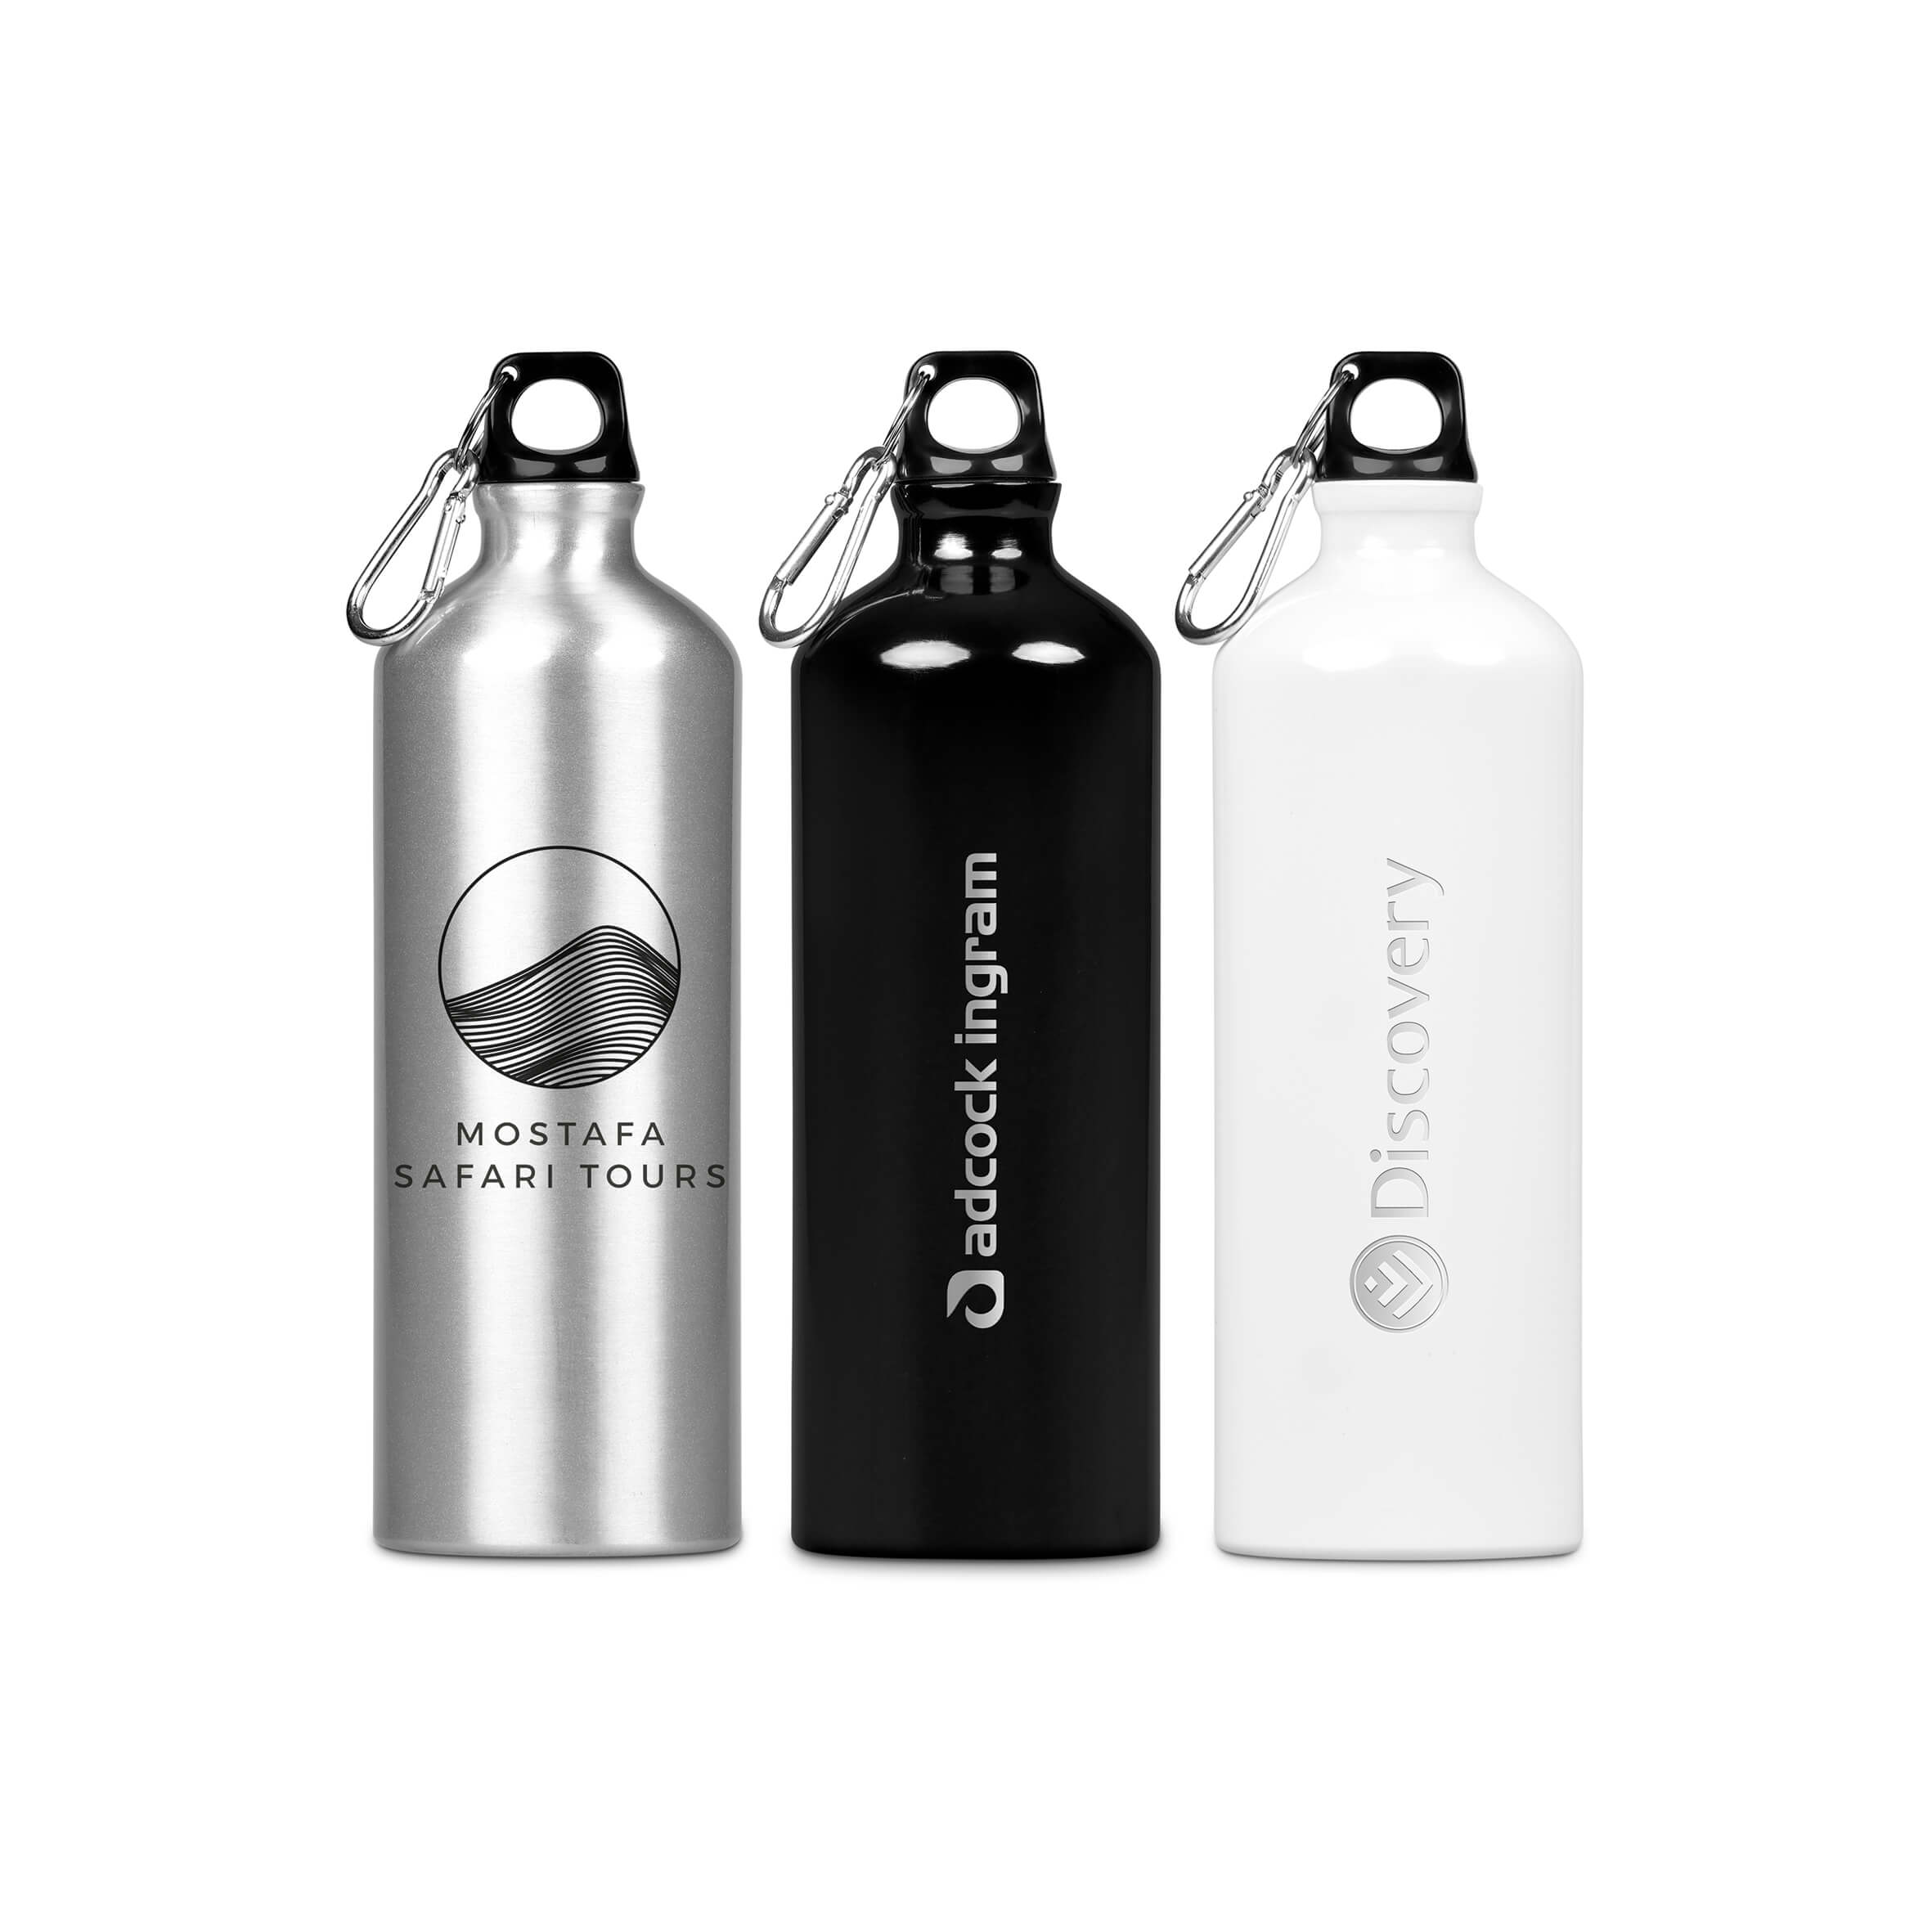 Our Top Promotional Gifts 16